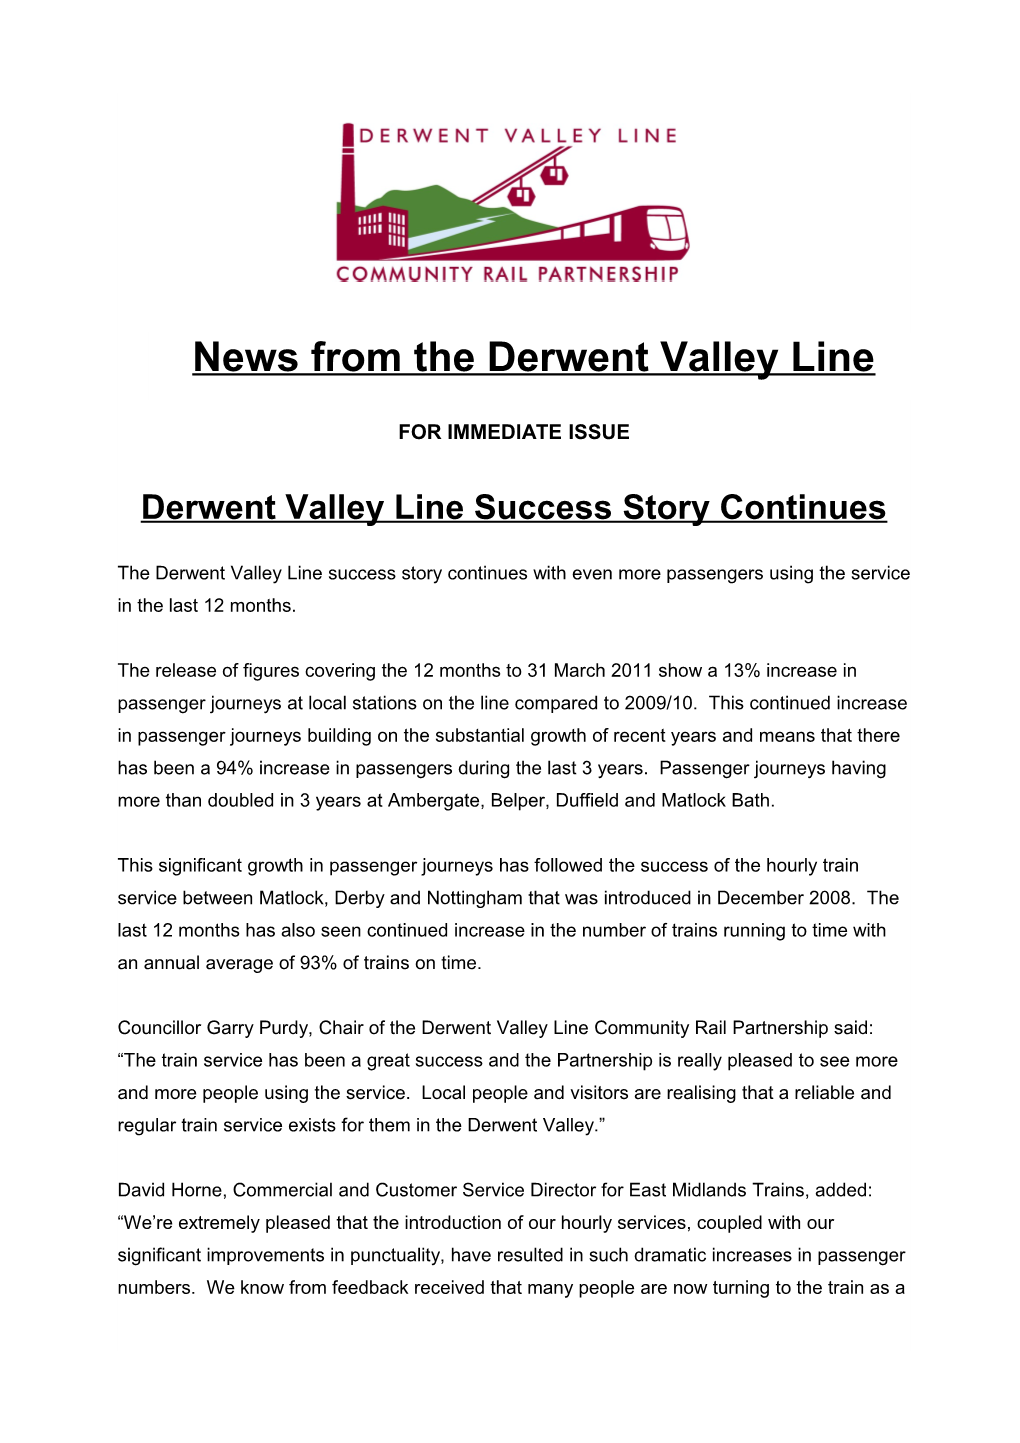 Derwent Valley Line Success Story Continues